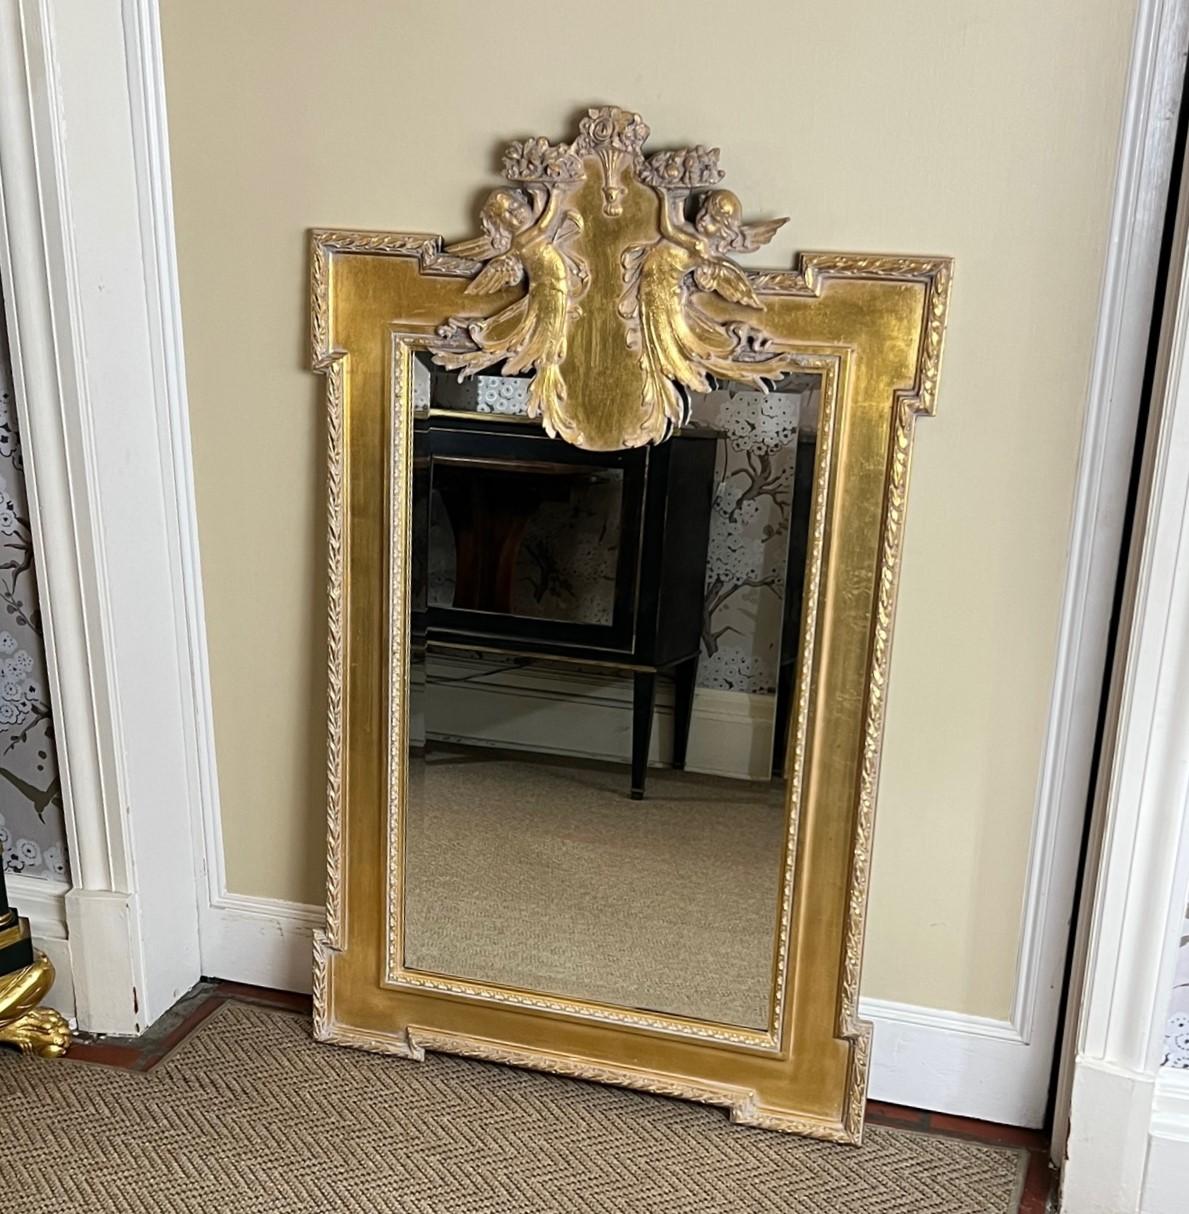 American 20th C. Neoclassical Style Giltwood Mirror with Cherub and Floral Decoration For Sale